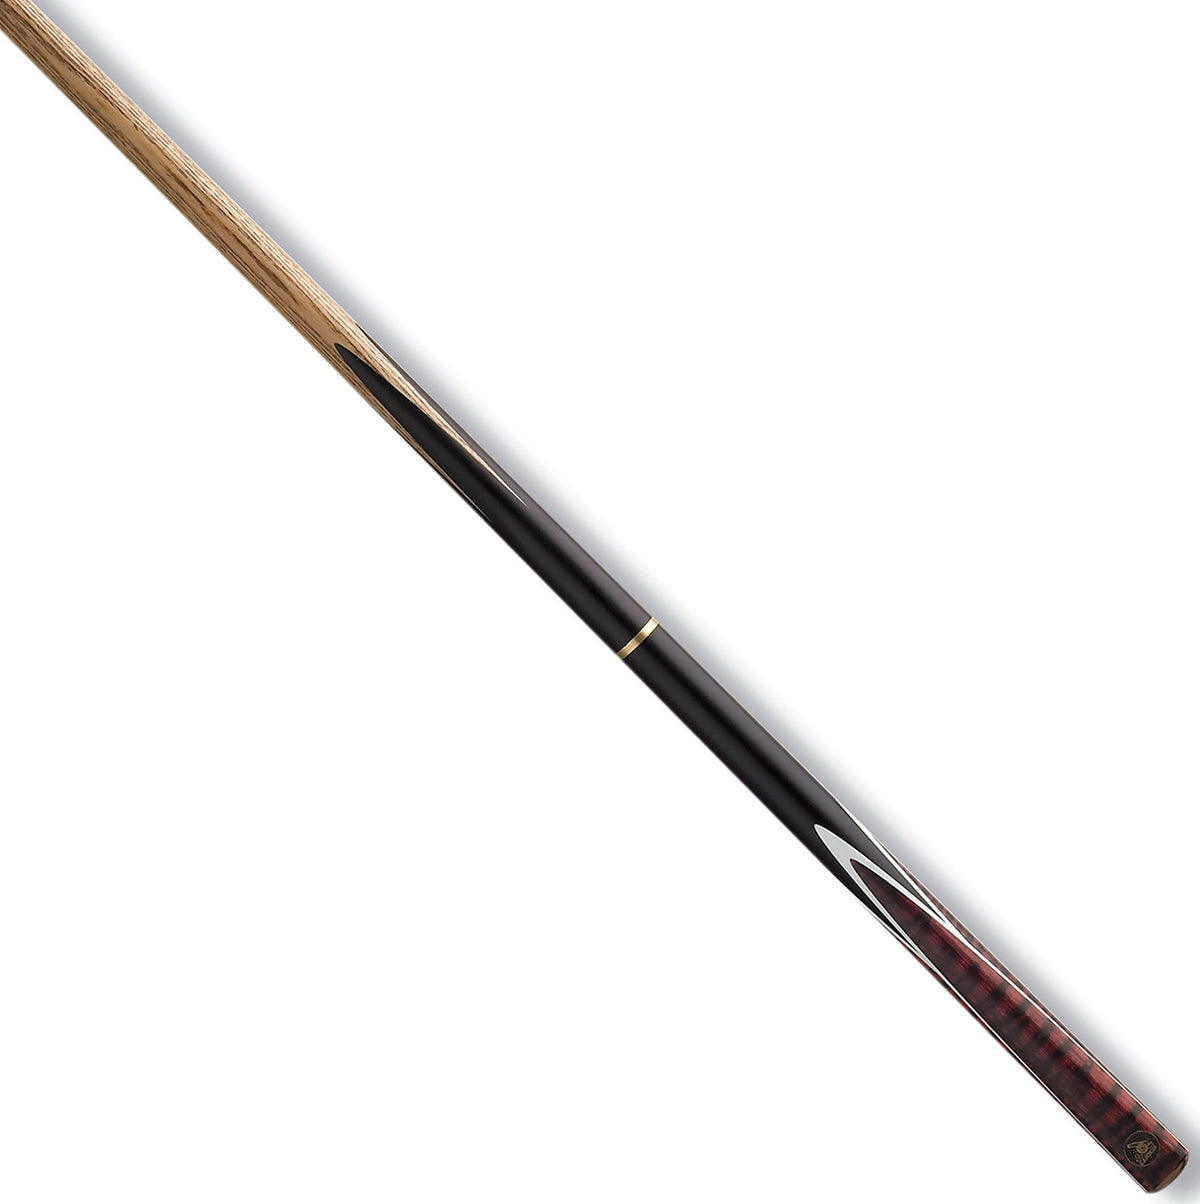 Cannon Diamond 3/4 Jointed Snooker Cue. On angle view